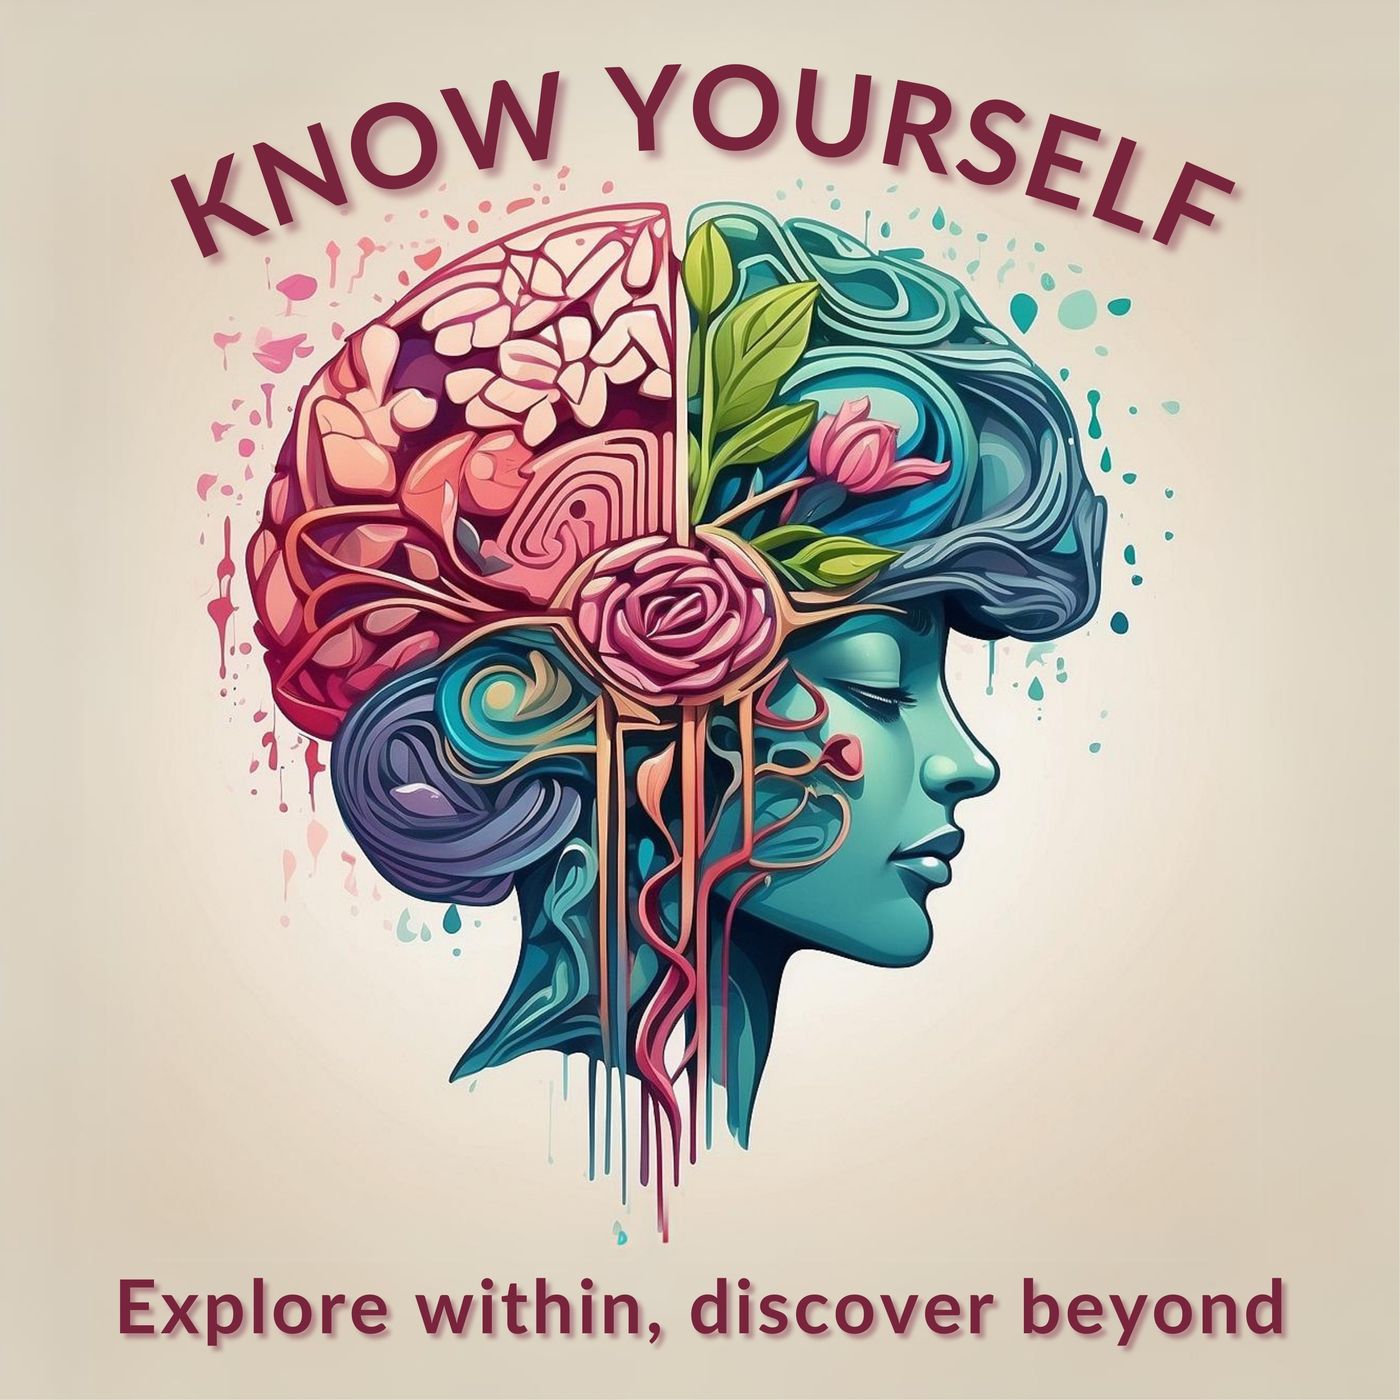 Know Yourself Image